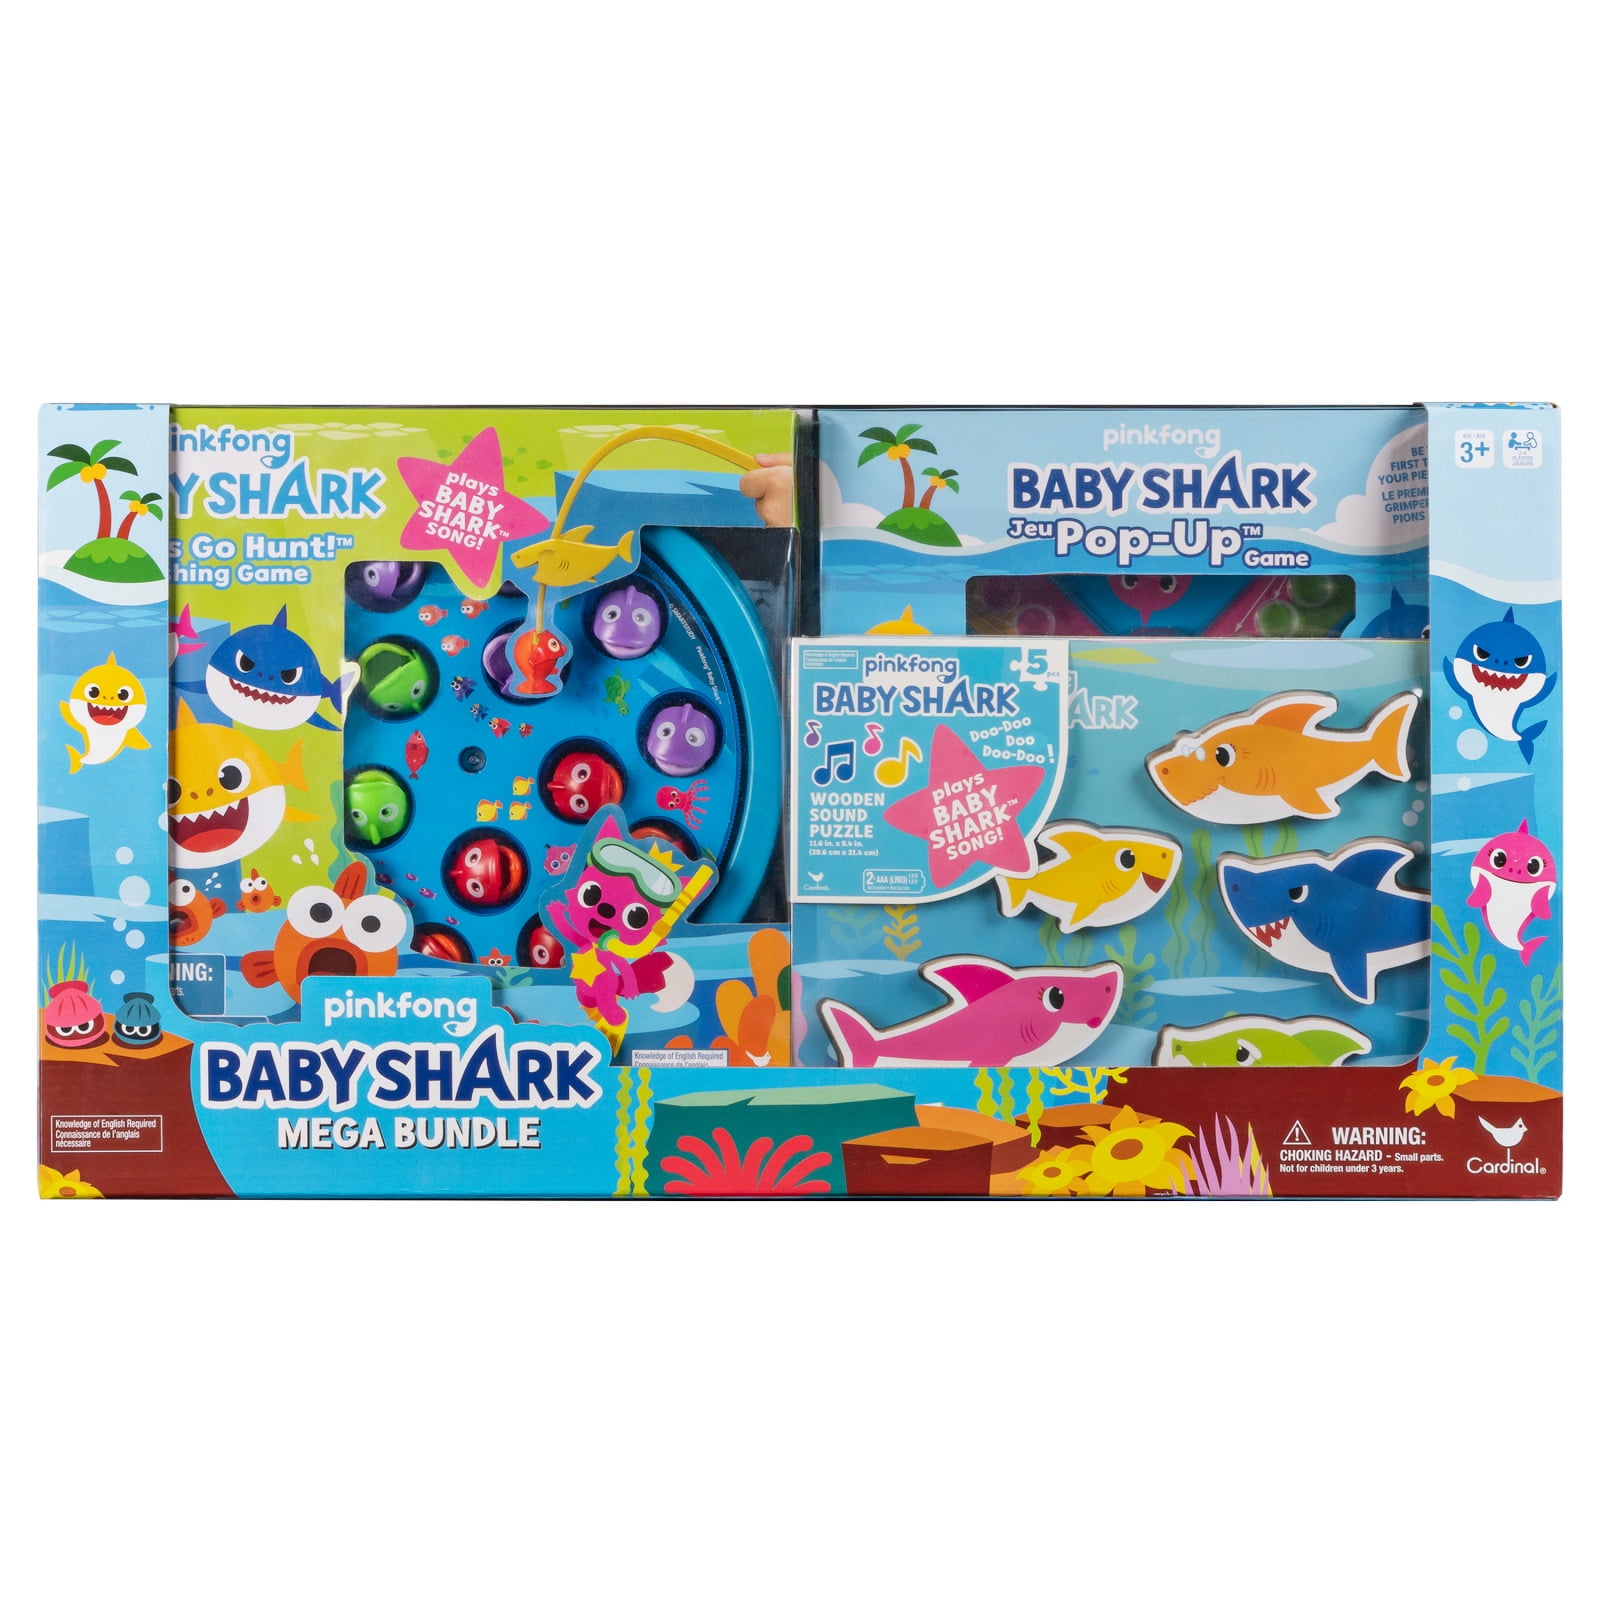 Pinkfong Baby Shark Mega Bundle with Puzzles and Games for Kids 